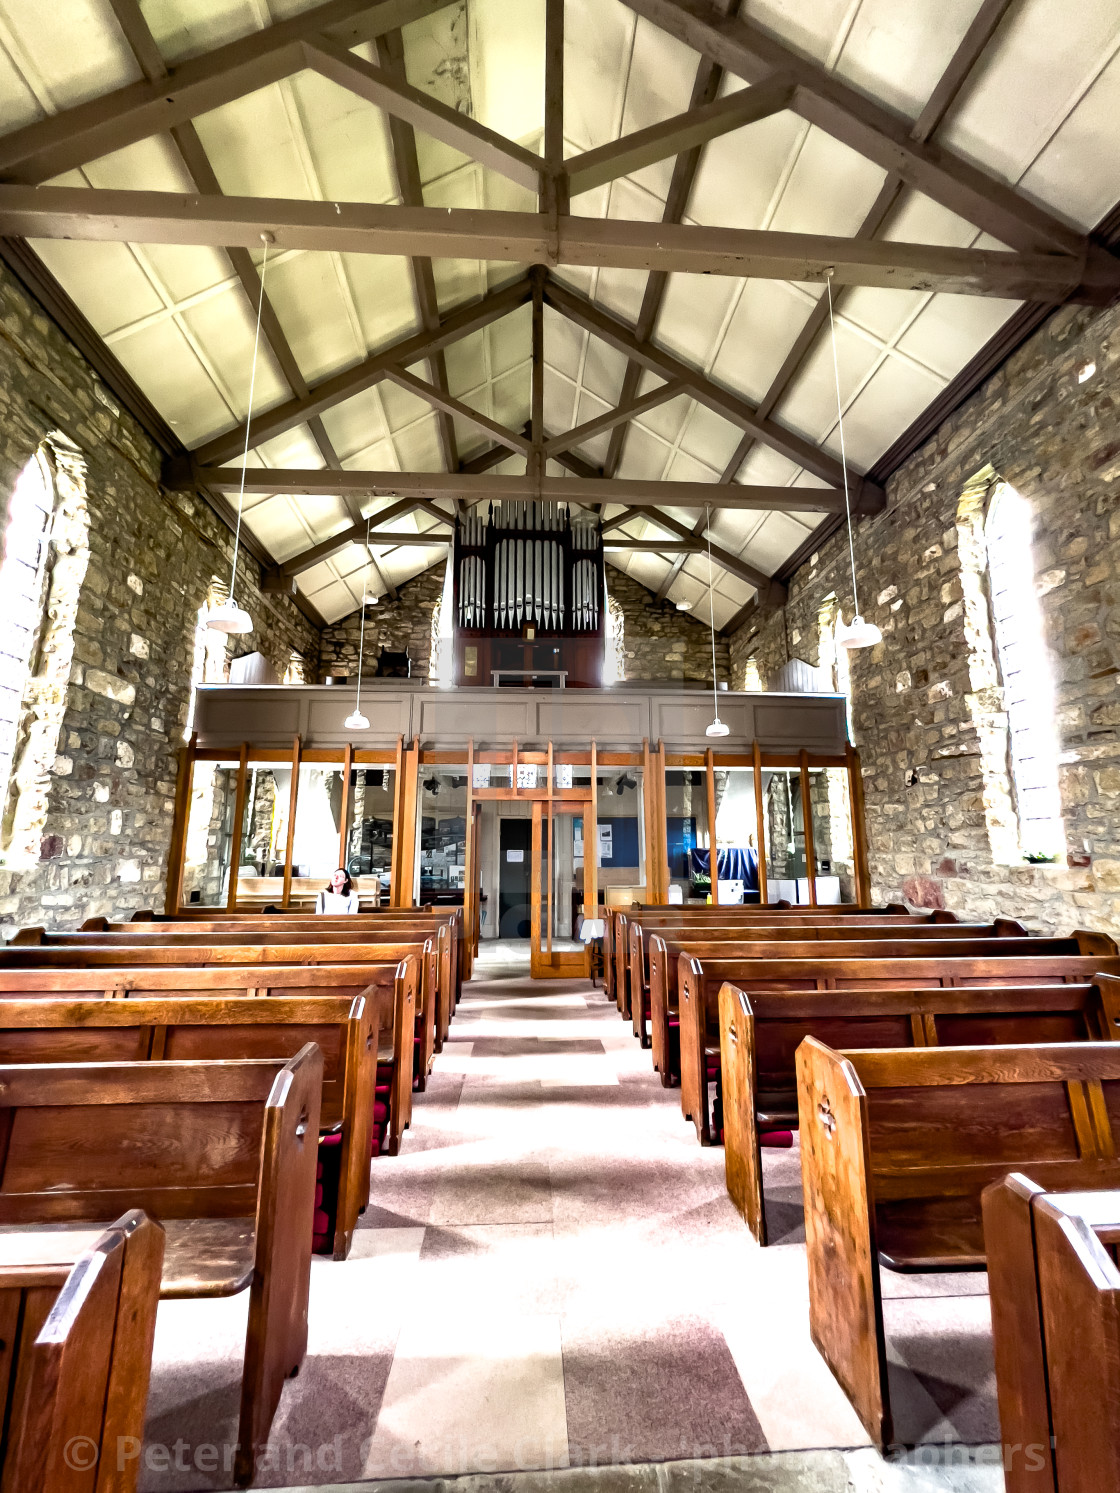 "St Mary and St Laurence Church, Interior, Rosedale Abbey." stock image